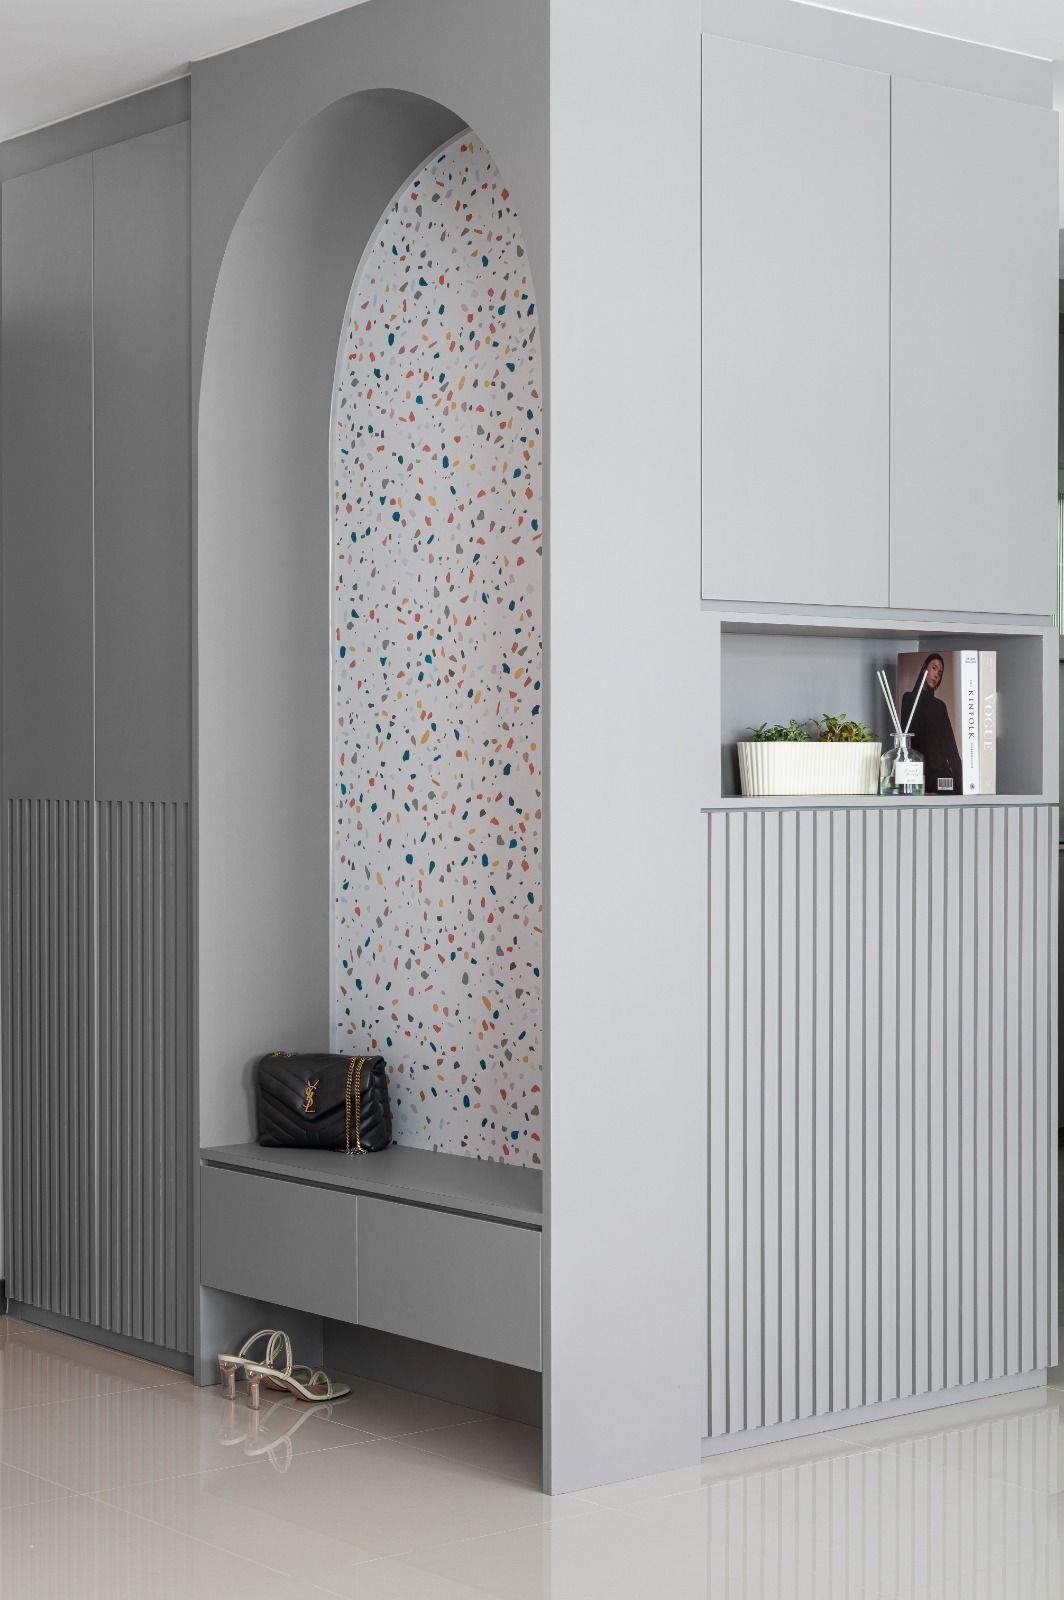 A stylish room with a Terrazzo tiled wall